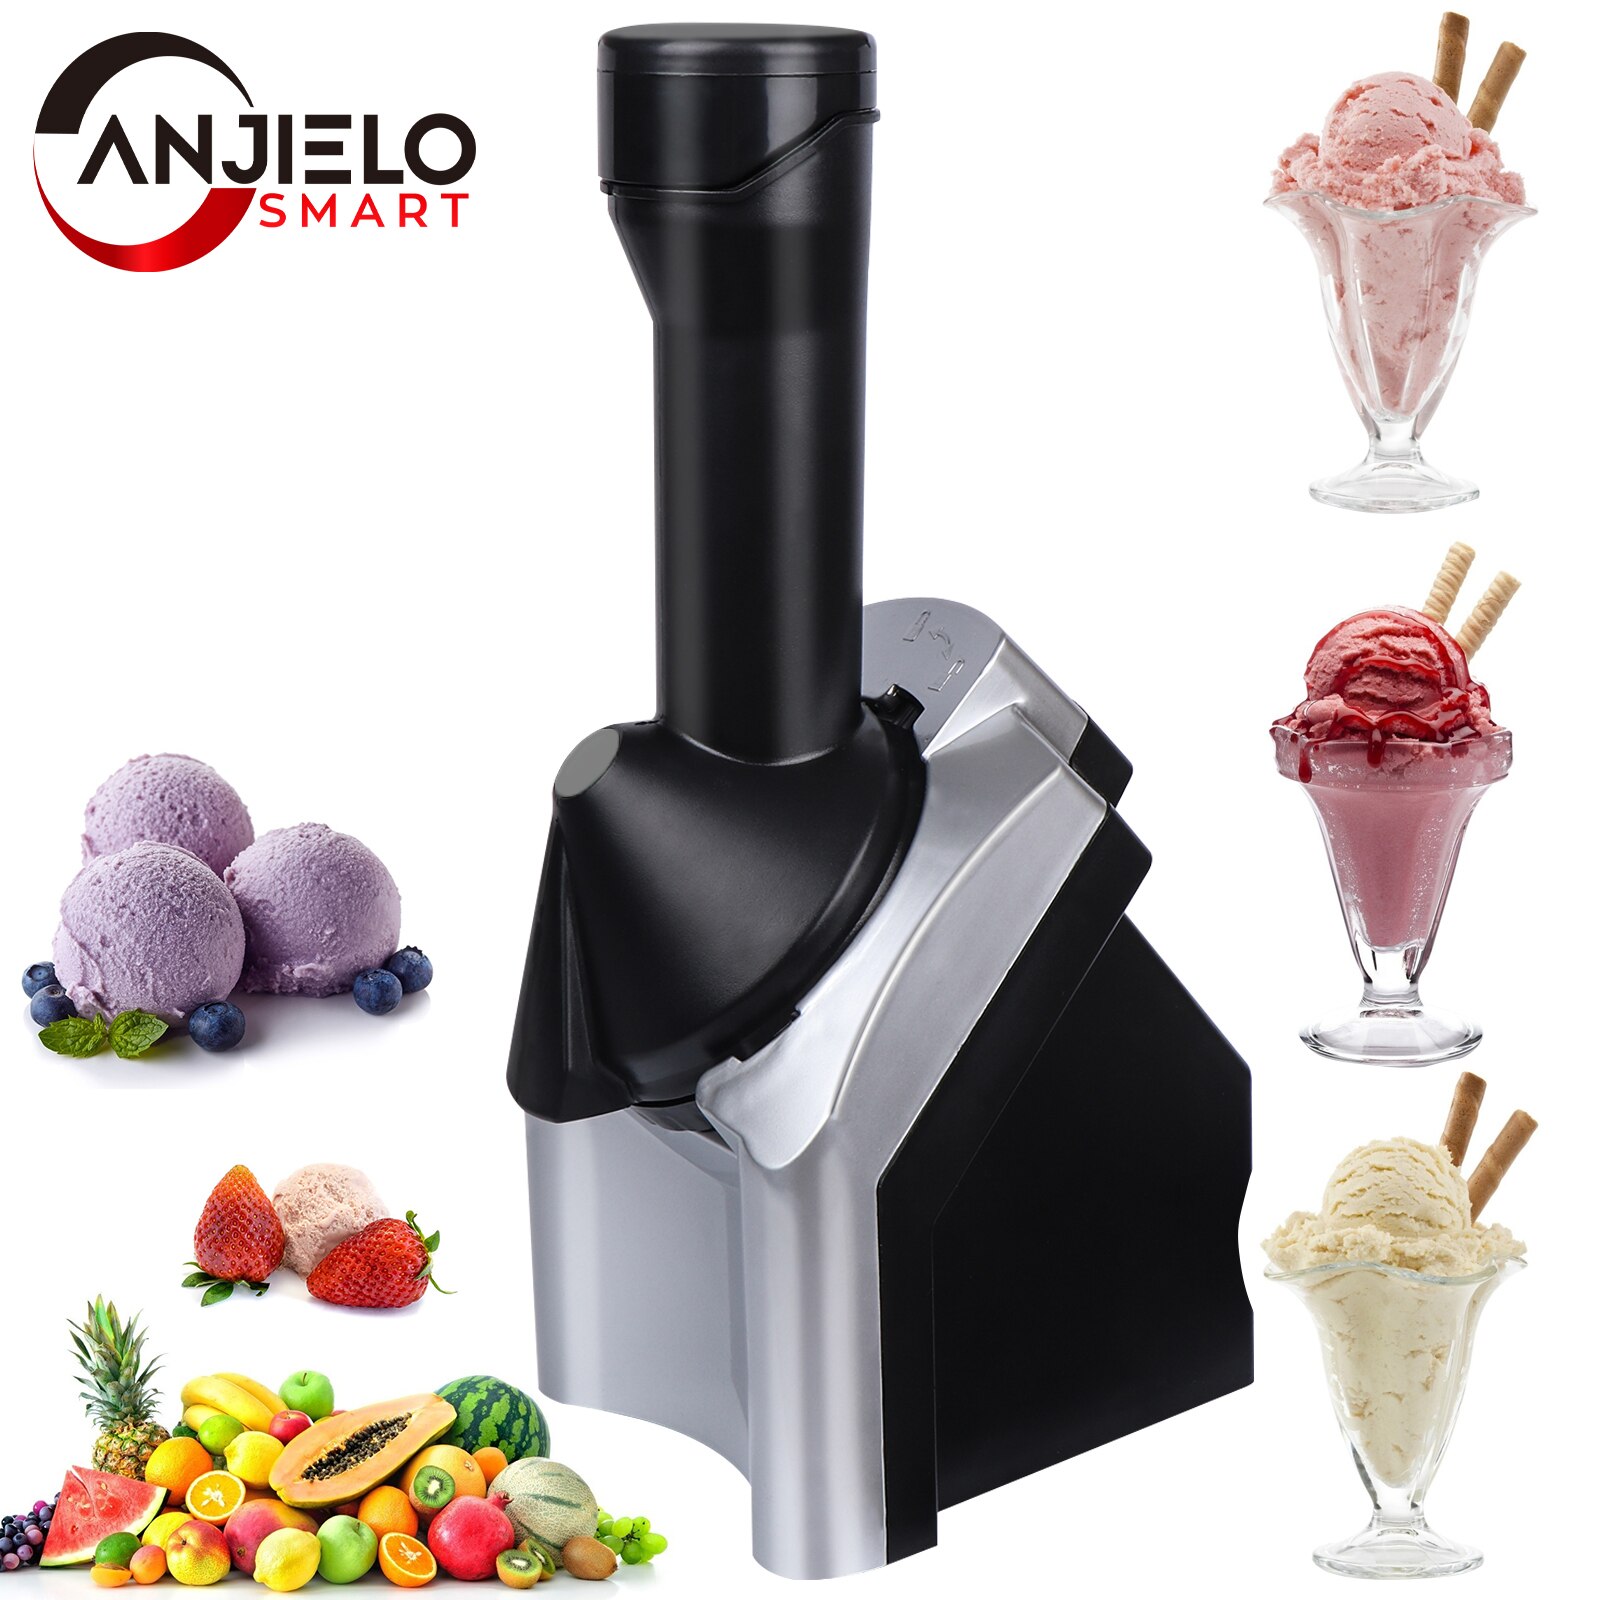 Automatic Ice Cream Maker for Healthy Treats